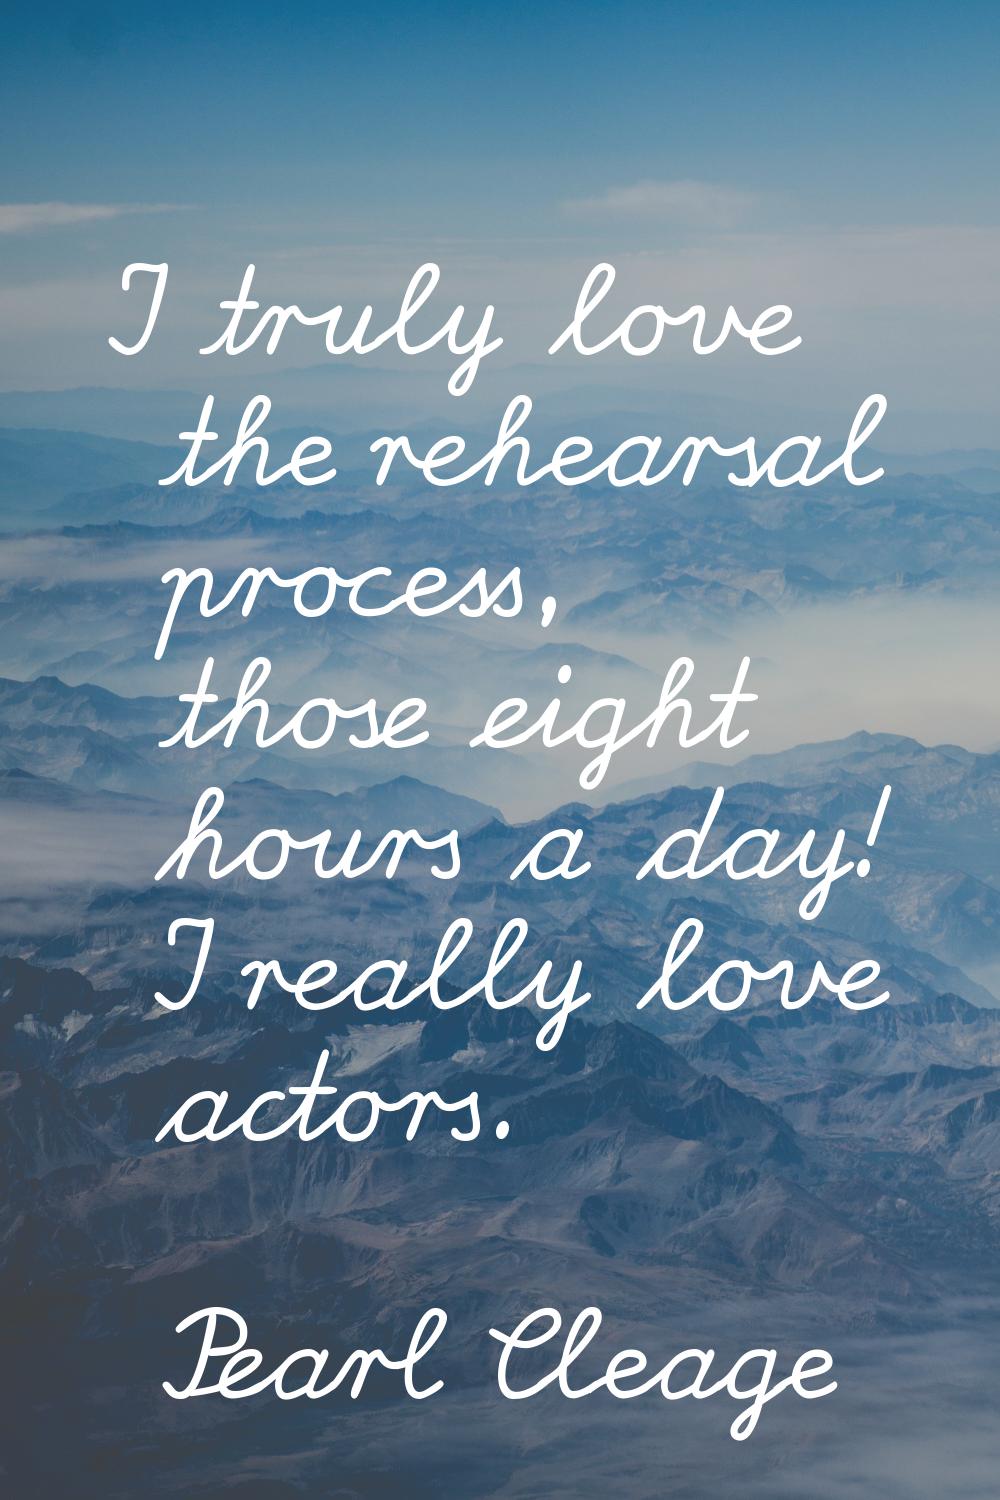 I truly love the rehearsal process, those eight hours a day! I really love actors.